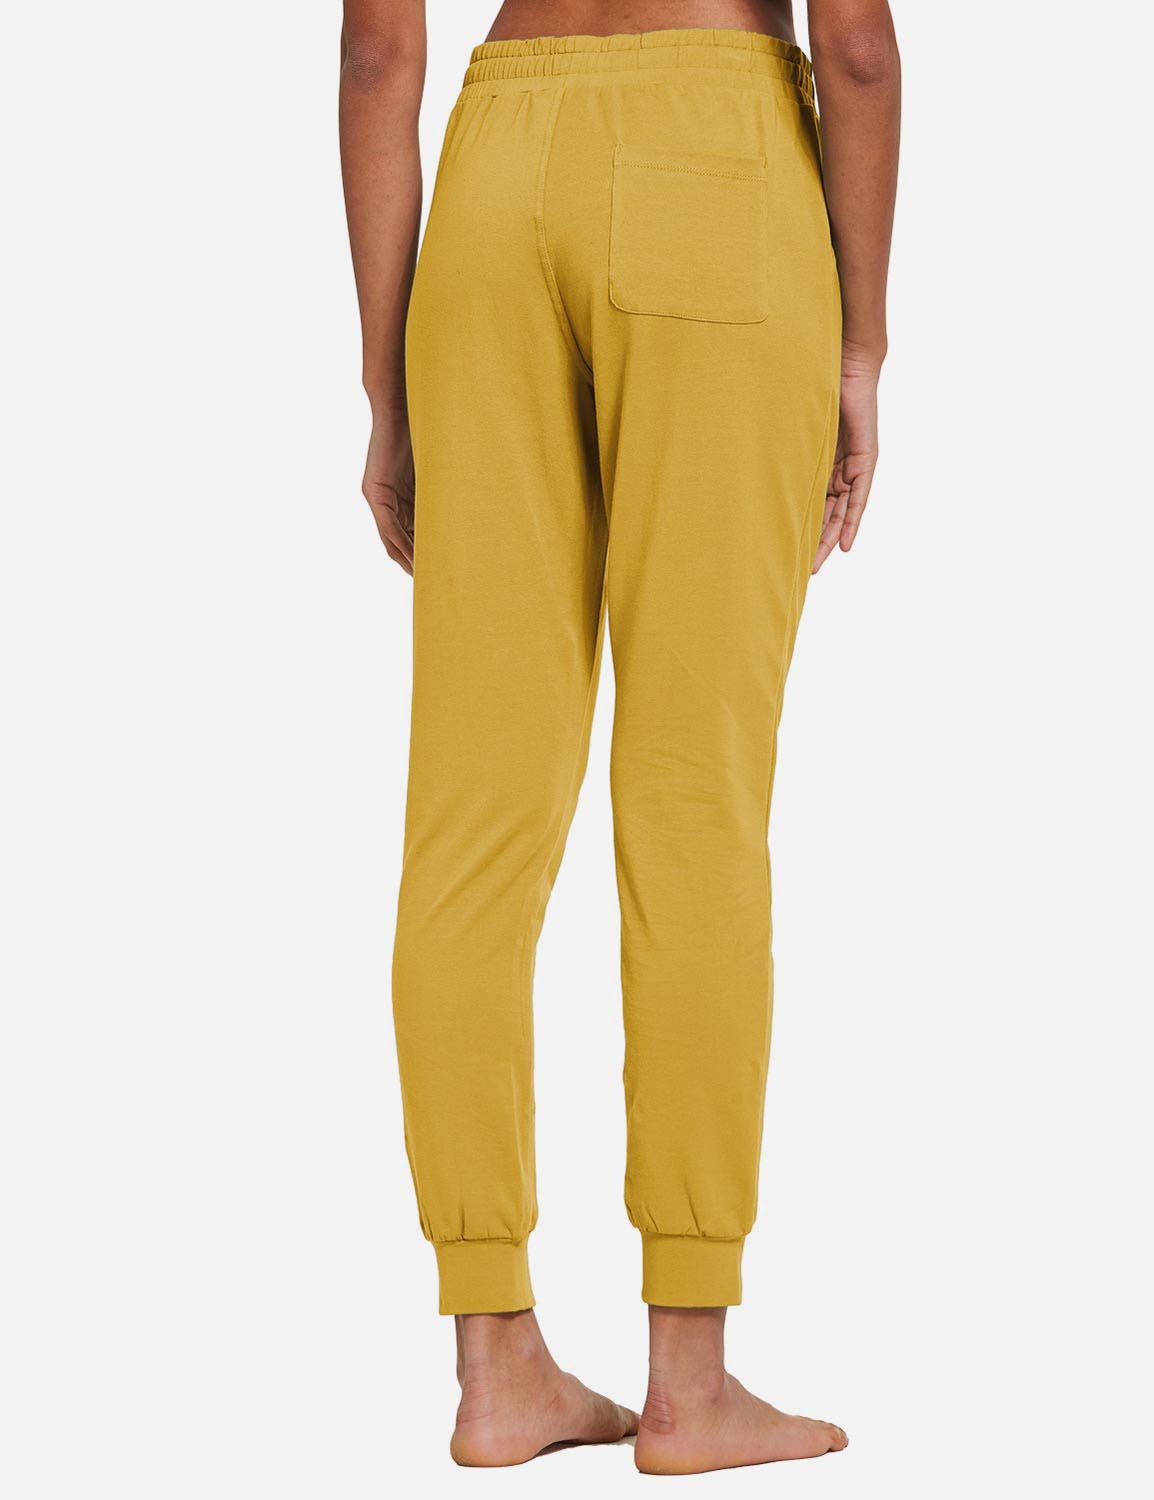 Baleaf Women's Cotton Comfy Pocketed & Tapered Weekend Joggers abh103 Misted Yellow Back